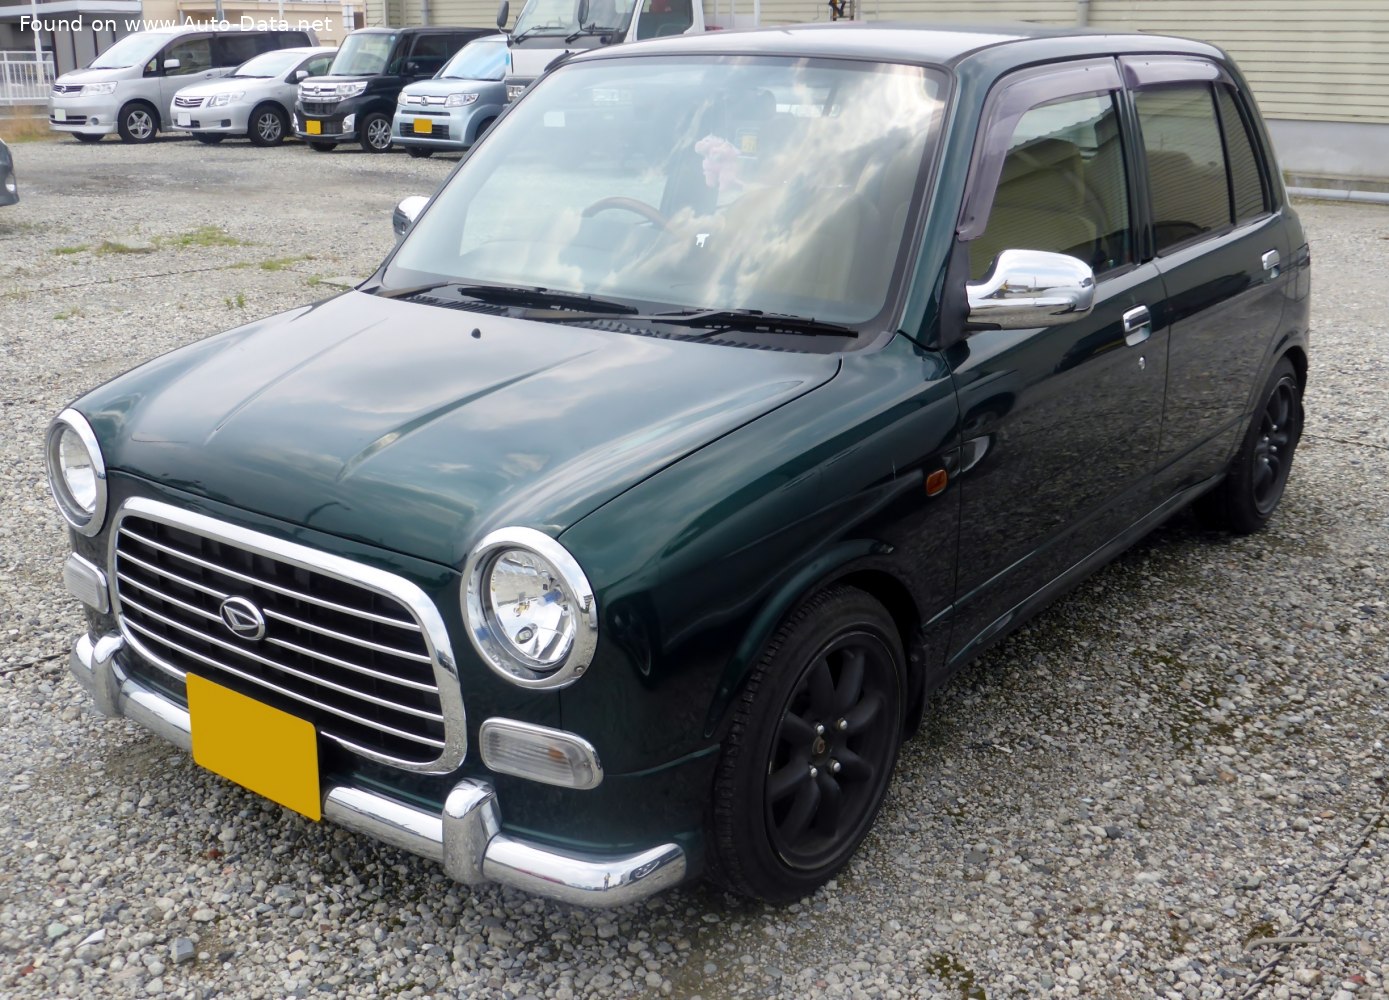 2004 Daihatsu Cuore vii - pictures, information and specs 